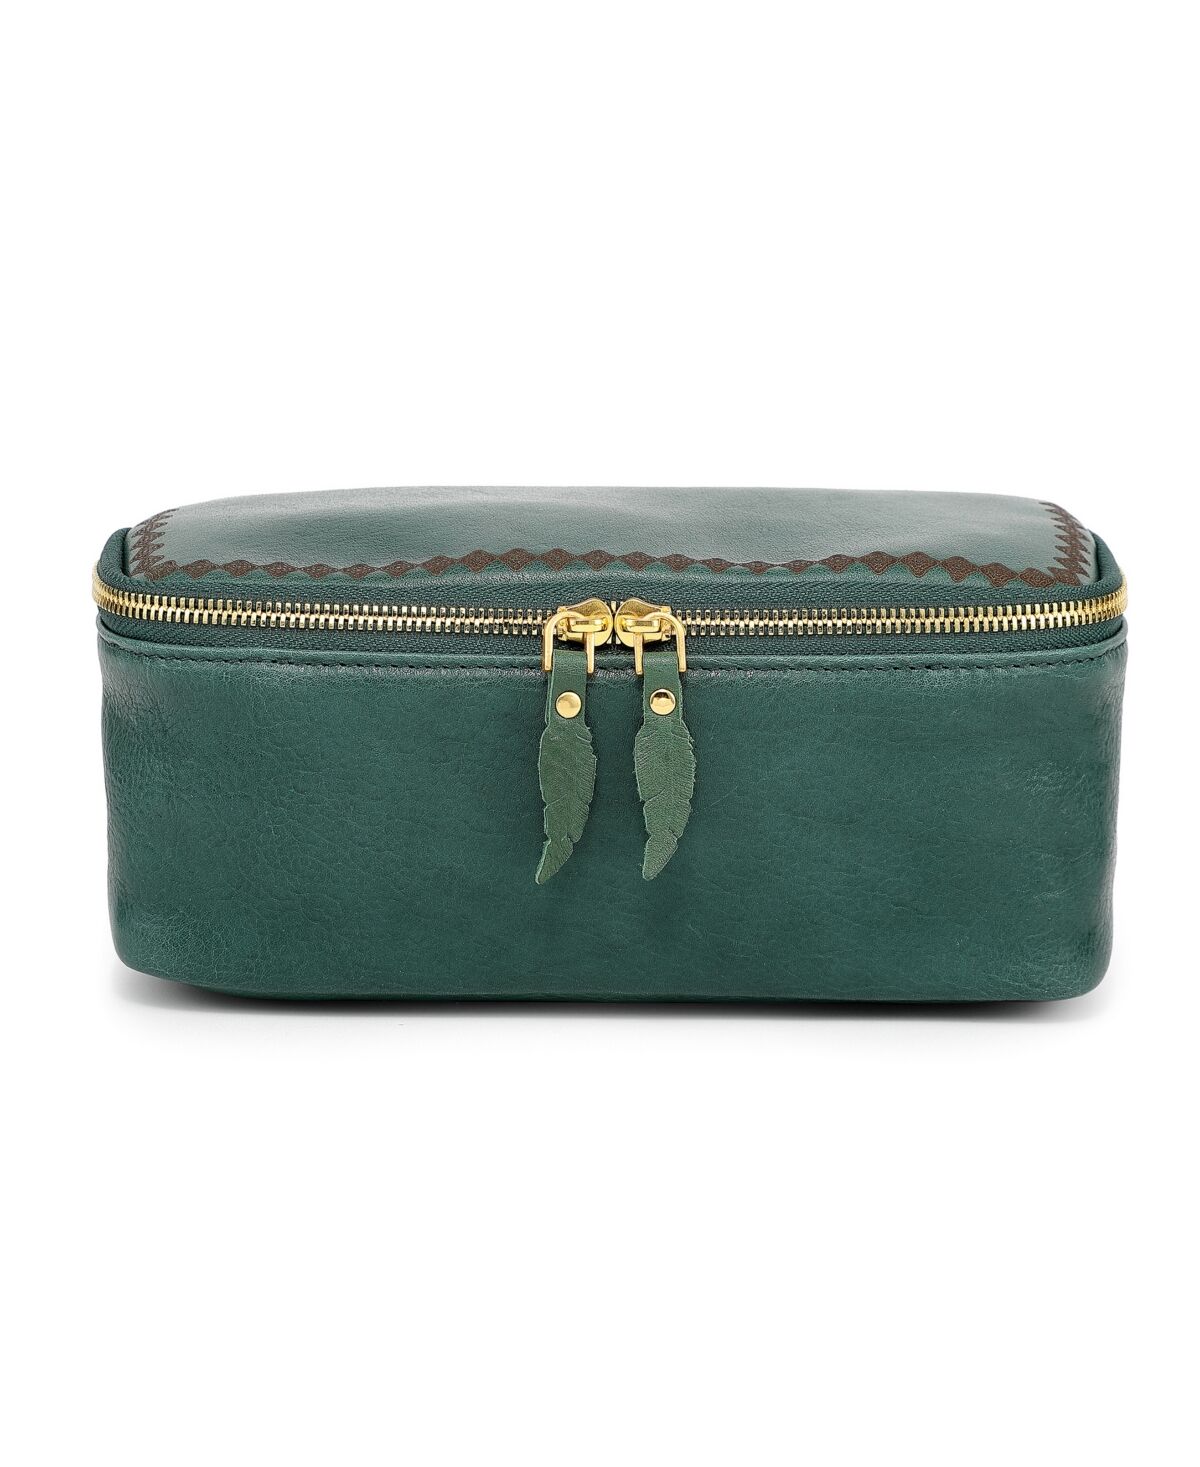 Old Trend Celosia Rectangular Leather Jewelry Case - Vintage green